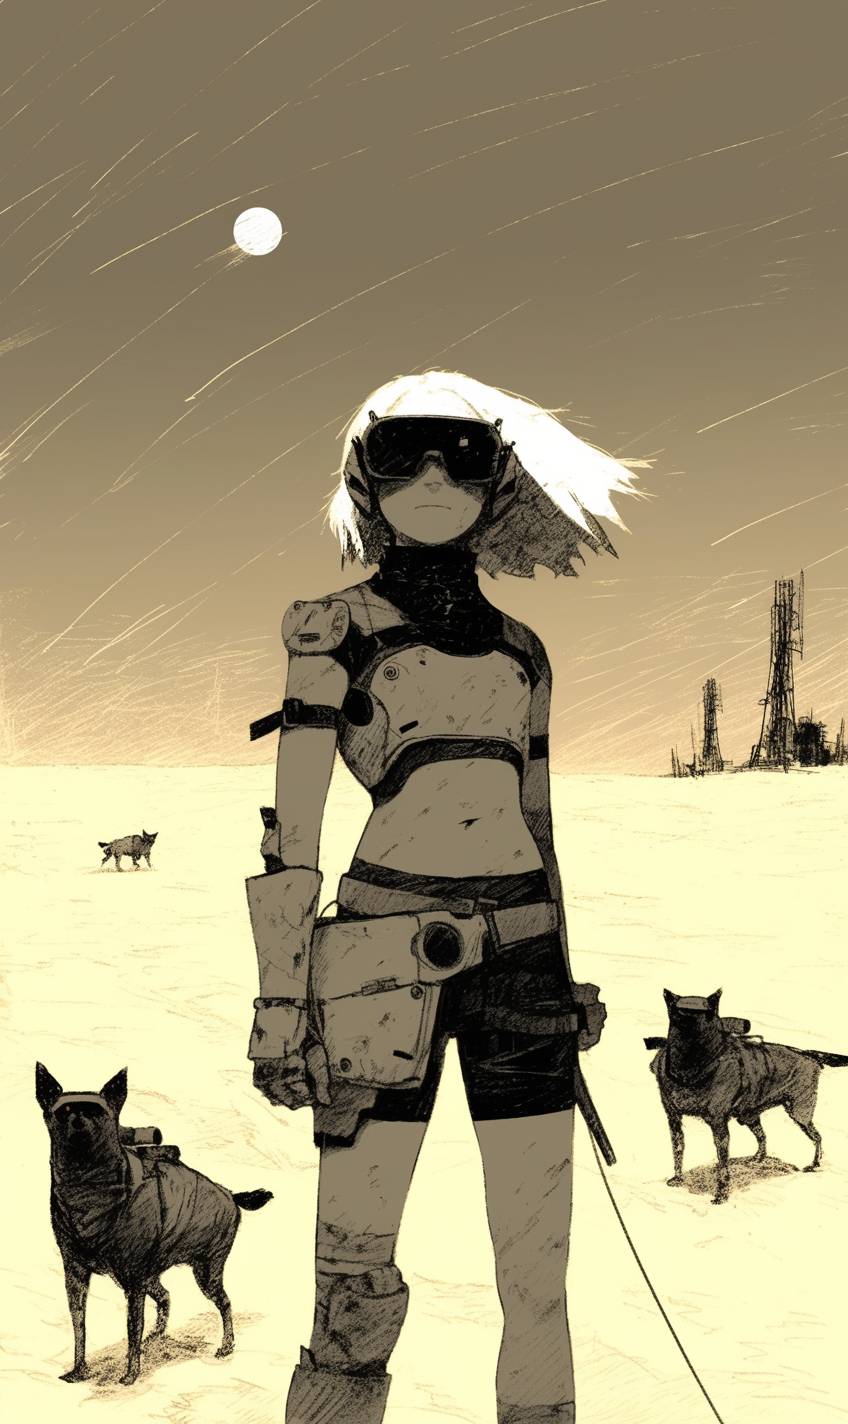 Recore's Joule Adams, with her robotic companions, presents a mix of sci-fi and adventure elements in a vast desert landscape